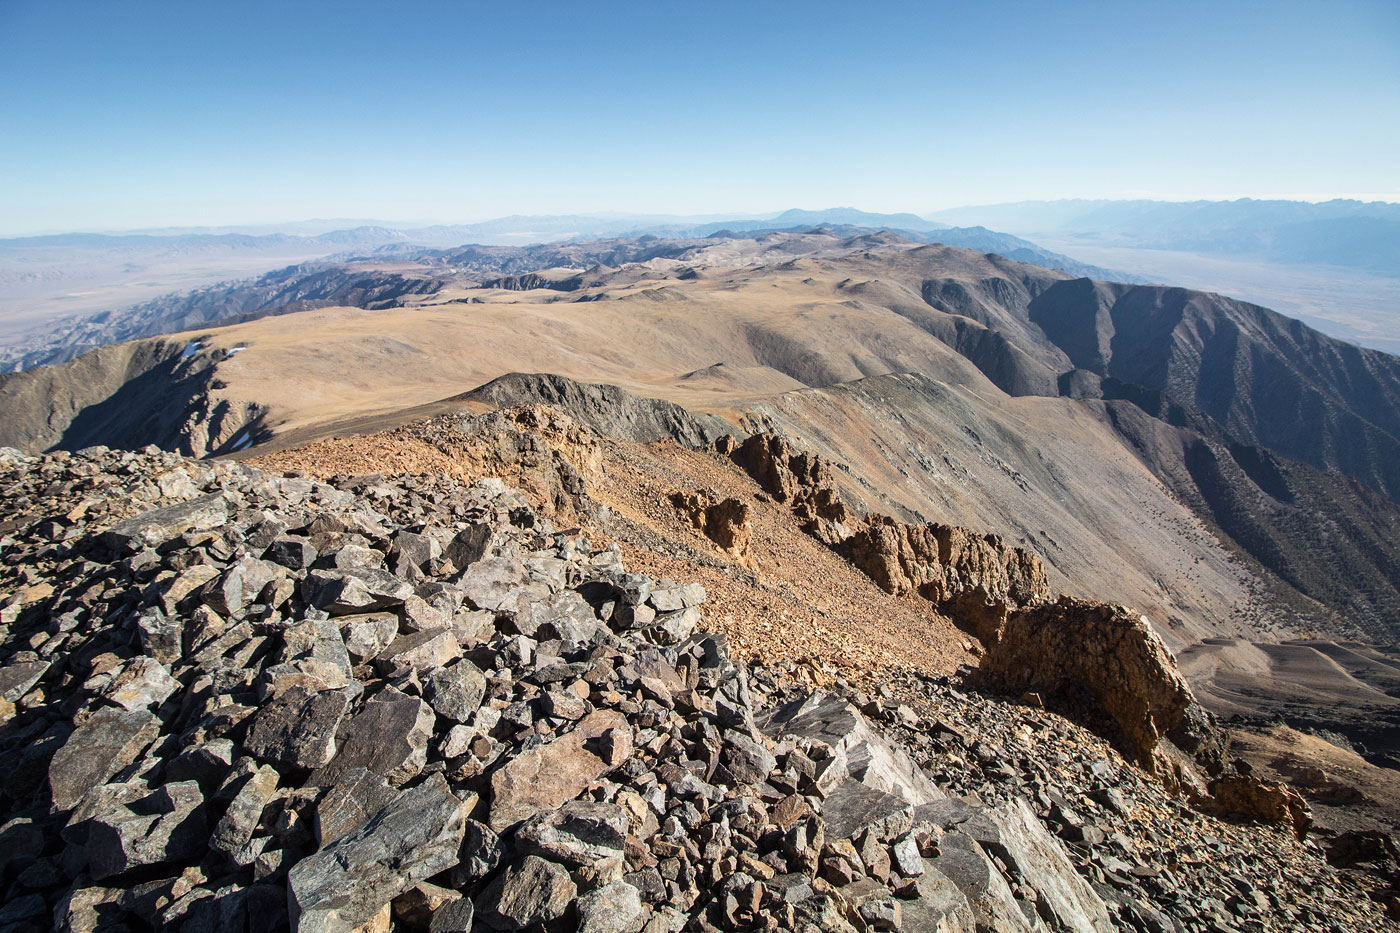 Hike Piute Mountain, Mount Barcroft, White Mountain Peak in Inyo National Forest, California - Stav is Lost